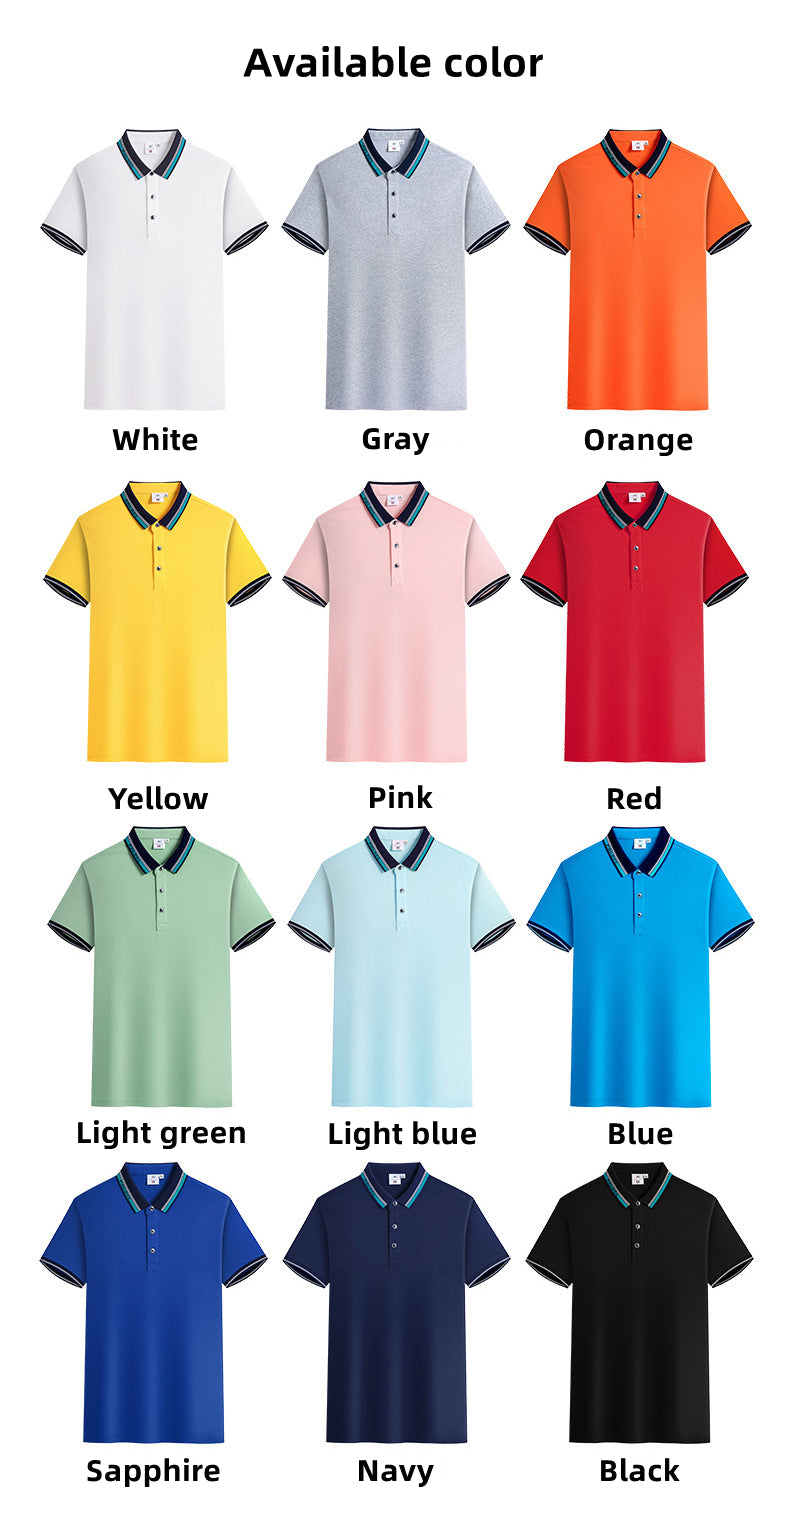 Custom LOGO/Pattern 180g 60% Cotton + 35% Ice Ion Fiber + 5% Spandex Two Buttons Ice Feel Soft and Breathable Business Polo-shirts For Men and Women (Instock) CST-066 Z99217